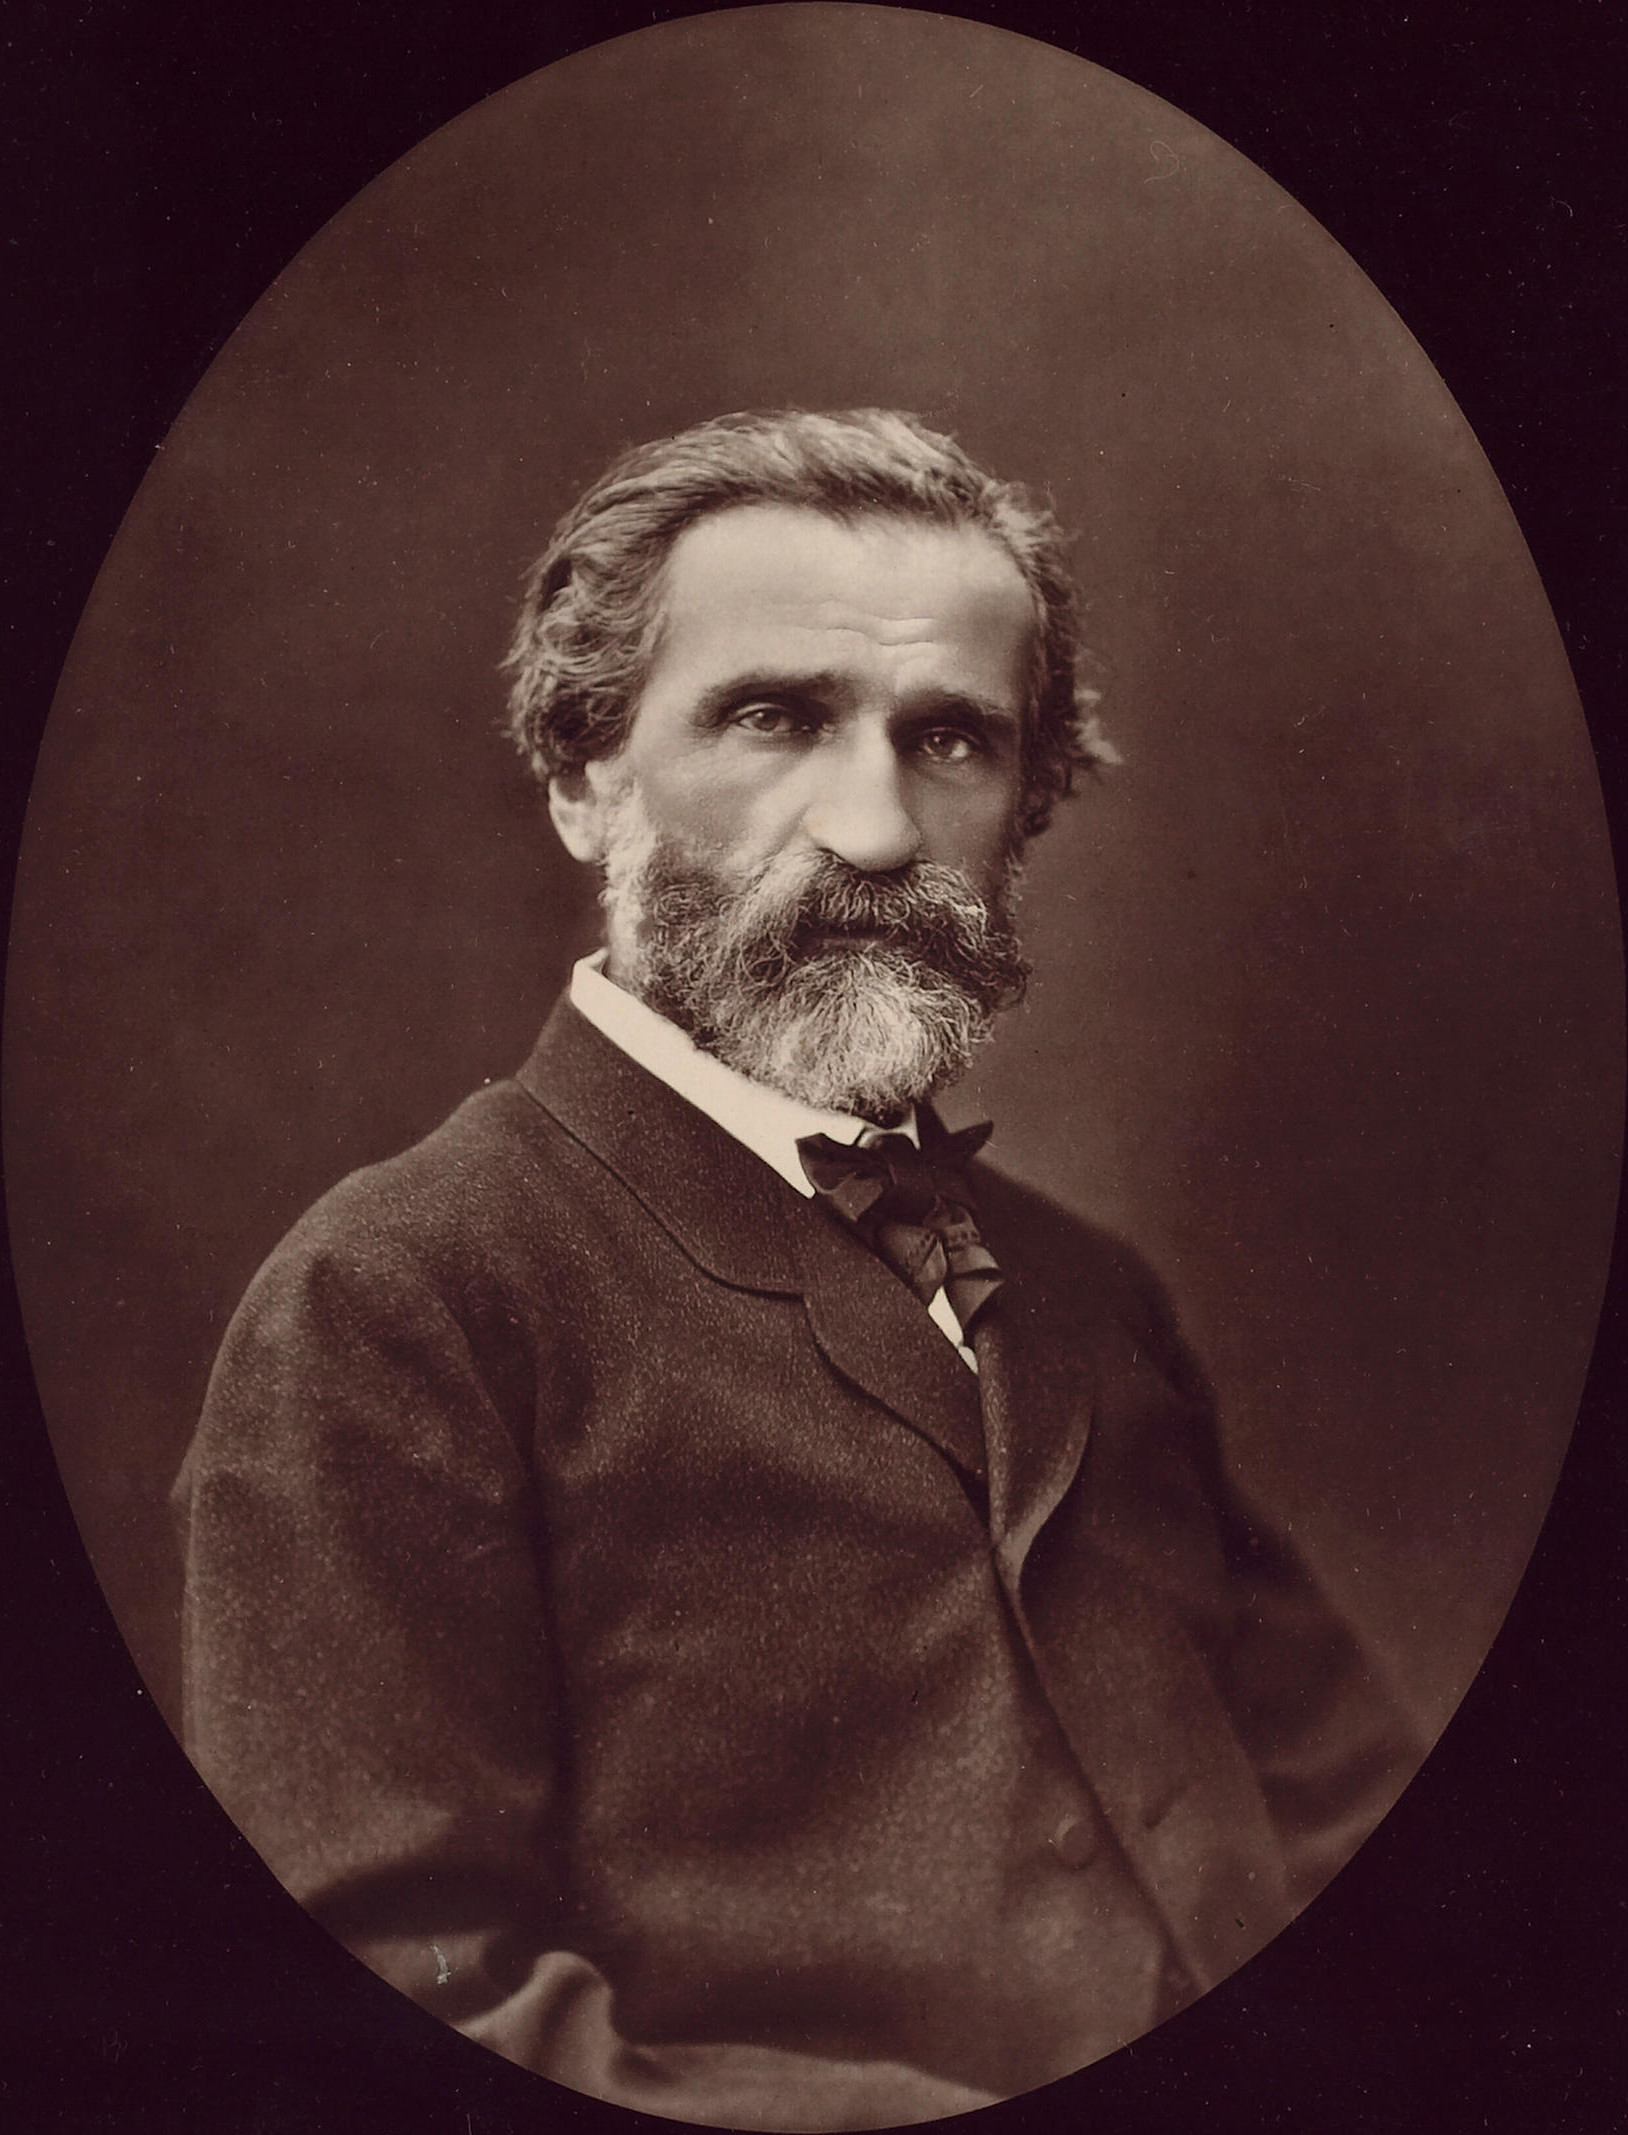 Verdi, in his maturity.  After Nabucco, he became the great Italian popular idol